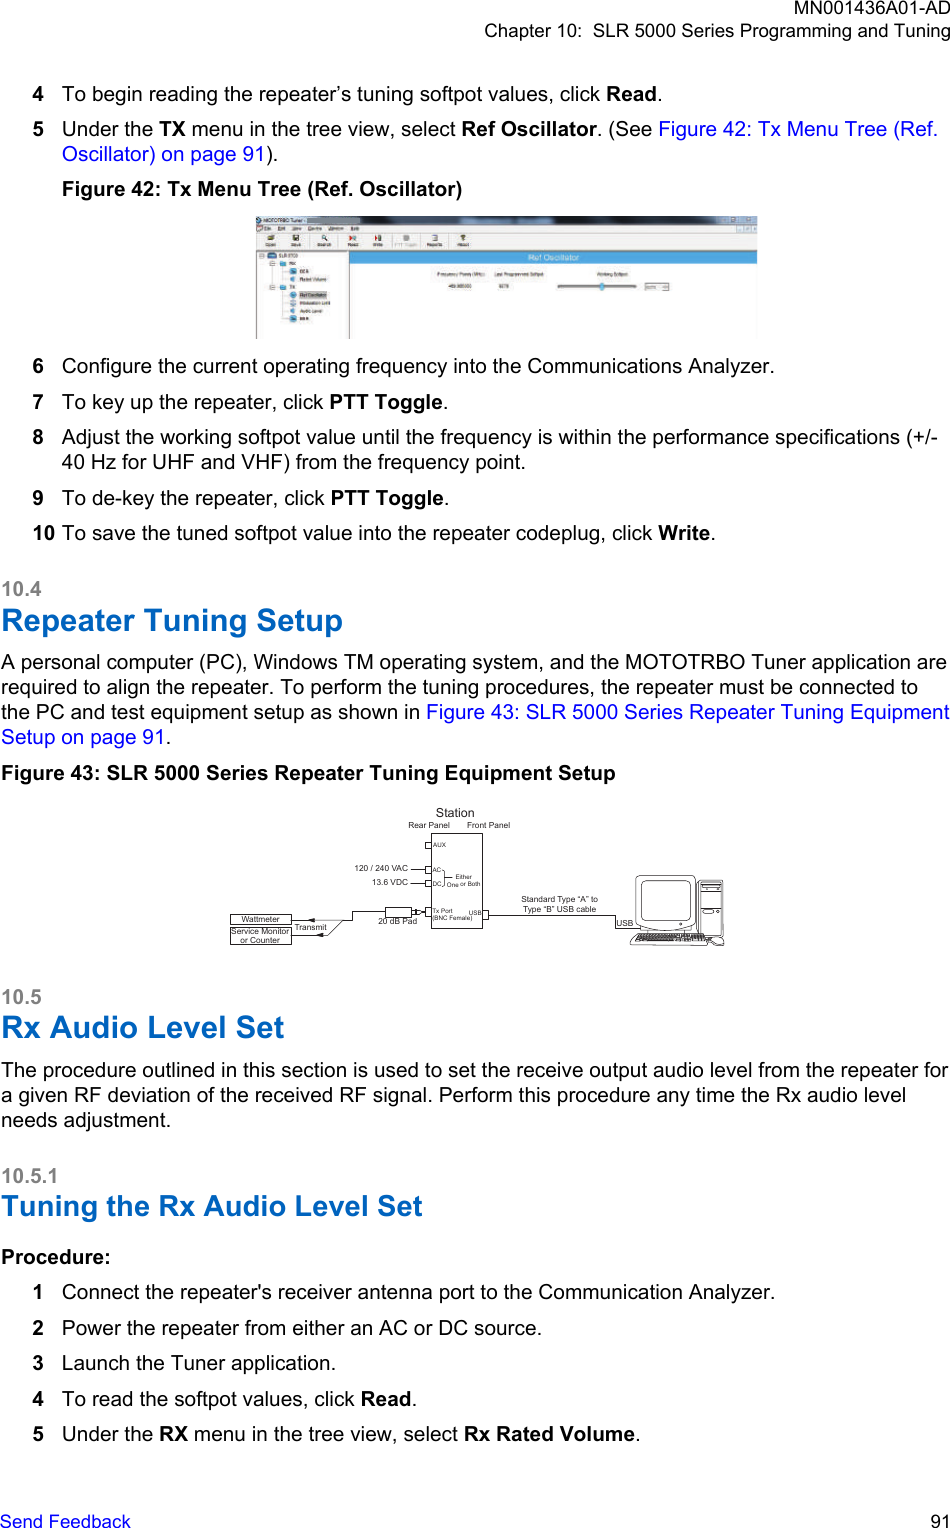 4To begin reading the repeater’s tuning softpot values, click Read.5Under the TX menu in the tree view, select Ref Oscillator. (See Figure 42: Tx Menu Tree (Ref.Oscillator) on page 91).Figure 42: Tx Menu Tree (Ref. Oscillator)6Configure the current operating frequency into the Communications Analyzer.7To key up the repeater, click PTT Toggle.8Adjust the working softpot value until the frequency is within the performance specifications (+/-40 Hz for UHF and VHF) from the frequency point.9To de-key the repeater, click PTT Toggle.10 To save the tuned softpot value into the repeater codeplug, click Write.10.4Repeater Tuning SetupA personal computer (PC), Windows TM operating system, and the MOTOTRBO Tuner application arerequired to align the repeater. To perform the tuning procedures, the repeater must be connected tothe PC and test equipment setup as shown in Figure 43: SLR 5000 Series Repeater Tuning EquipmentSetup on page 91.Figure 43: SLR 5000 Series Repeater Tuning Equipment SetupTransmitService Monitoror CounterWattmeter 20 dB PadFront PanelACUSB120 / 240 VACStationTx Port(BNC Female)AUX DC13.6 VDCEither One or BothRear PanelStandard Type “A” to Type “B” USB cableUSB10.5Rx Audio Level SetThe procedure outlined in this section is used to set the receive output audio level from the repeater fora given RF deviation of the received RF signal. Perform this procedure any time the Rx audio levelneeds adjustment.10.5.1Tuning the Rx Audio Level SetProcedure:1Connect the repeater&apos;s receiver antenna port to the Communication Analyzer.2Power the repeater from either an AC or DC source.3Launch the Tuner application.4To read the softpot values, click Read.5Under the RX menu in the tree view, select Rx Rated Volume.MN001436A01-ADChapter 10:  SLR 5000 Series Programming and TuningSend Feedback   91